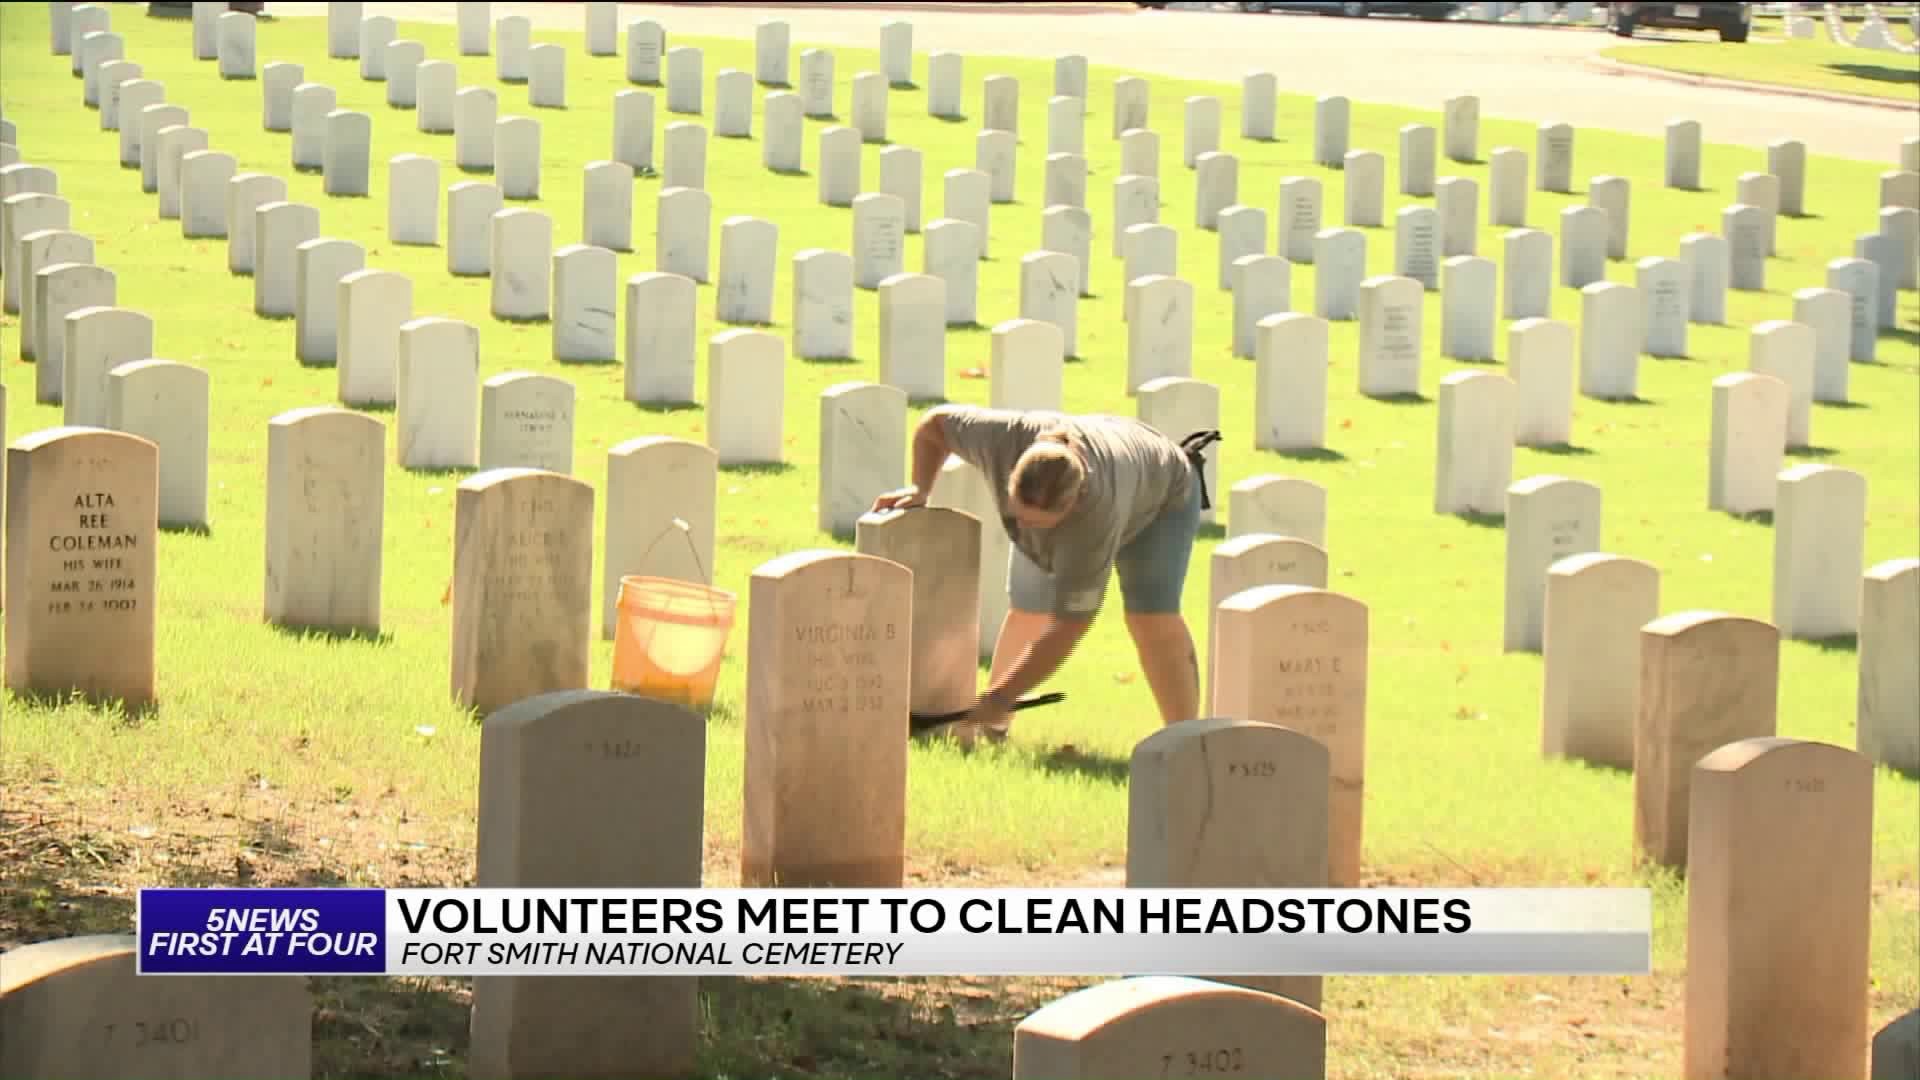 Volunteers Clean Headstones at Fort Smith National Cemetary